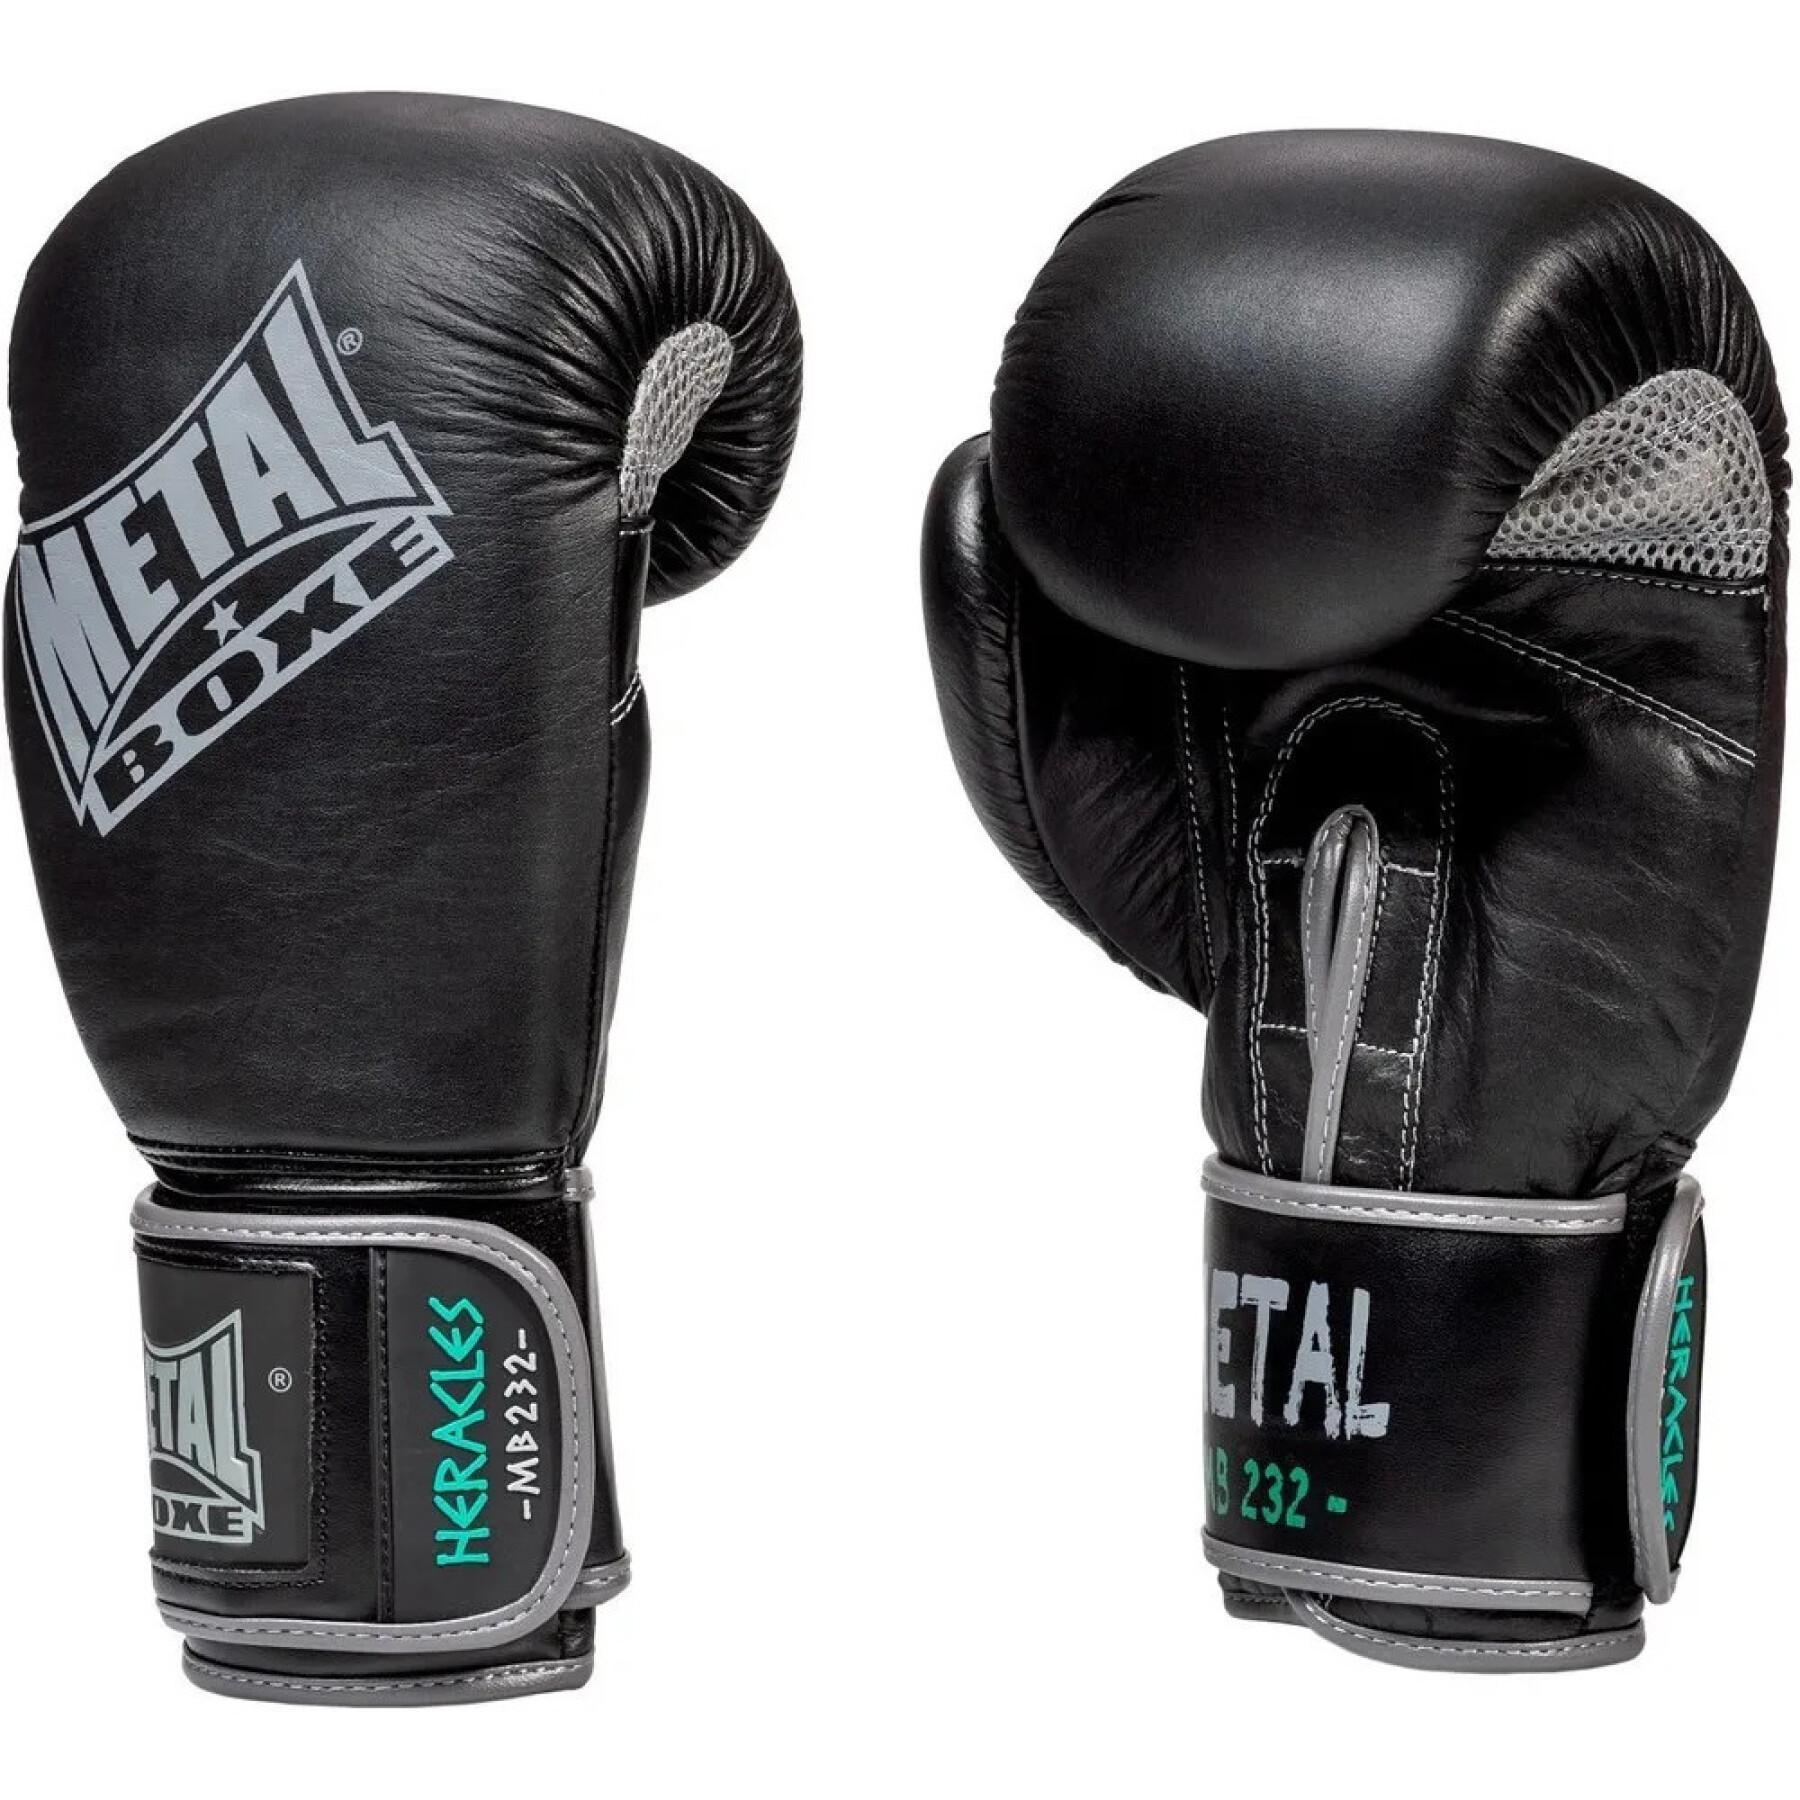 Leather boxing gloves Metal Boxe heracles